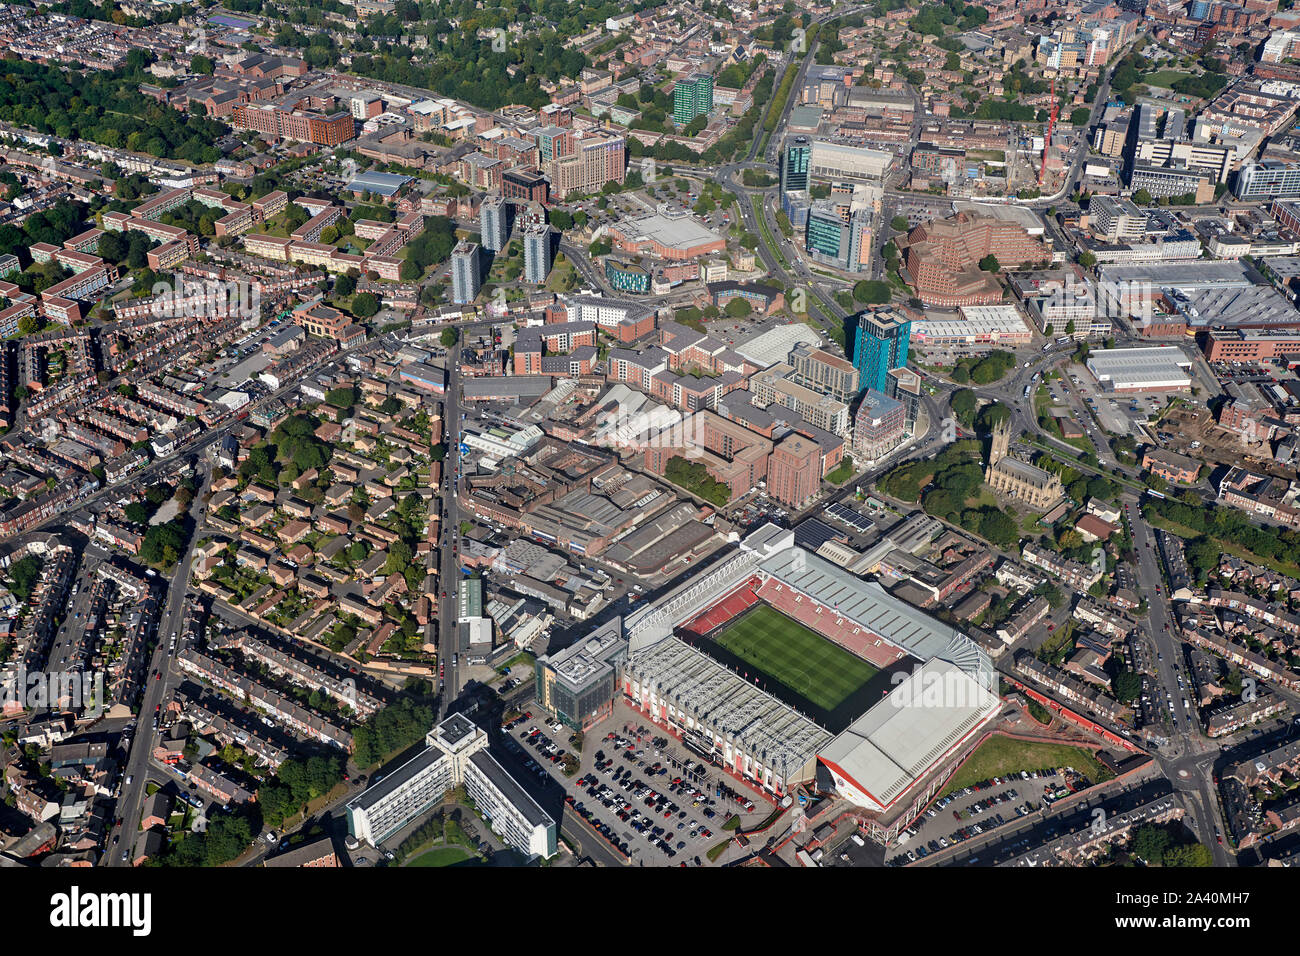 An aerial view of Sheffield city centre, South Yorkshire, Northern England, UK, Bramall Lane, home of Sheffield United, foreground Stock Photo